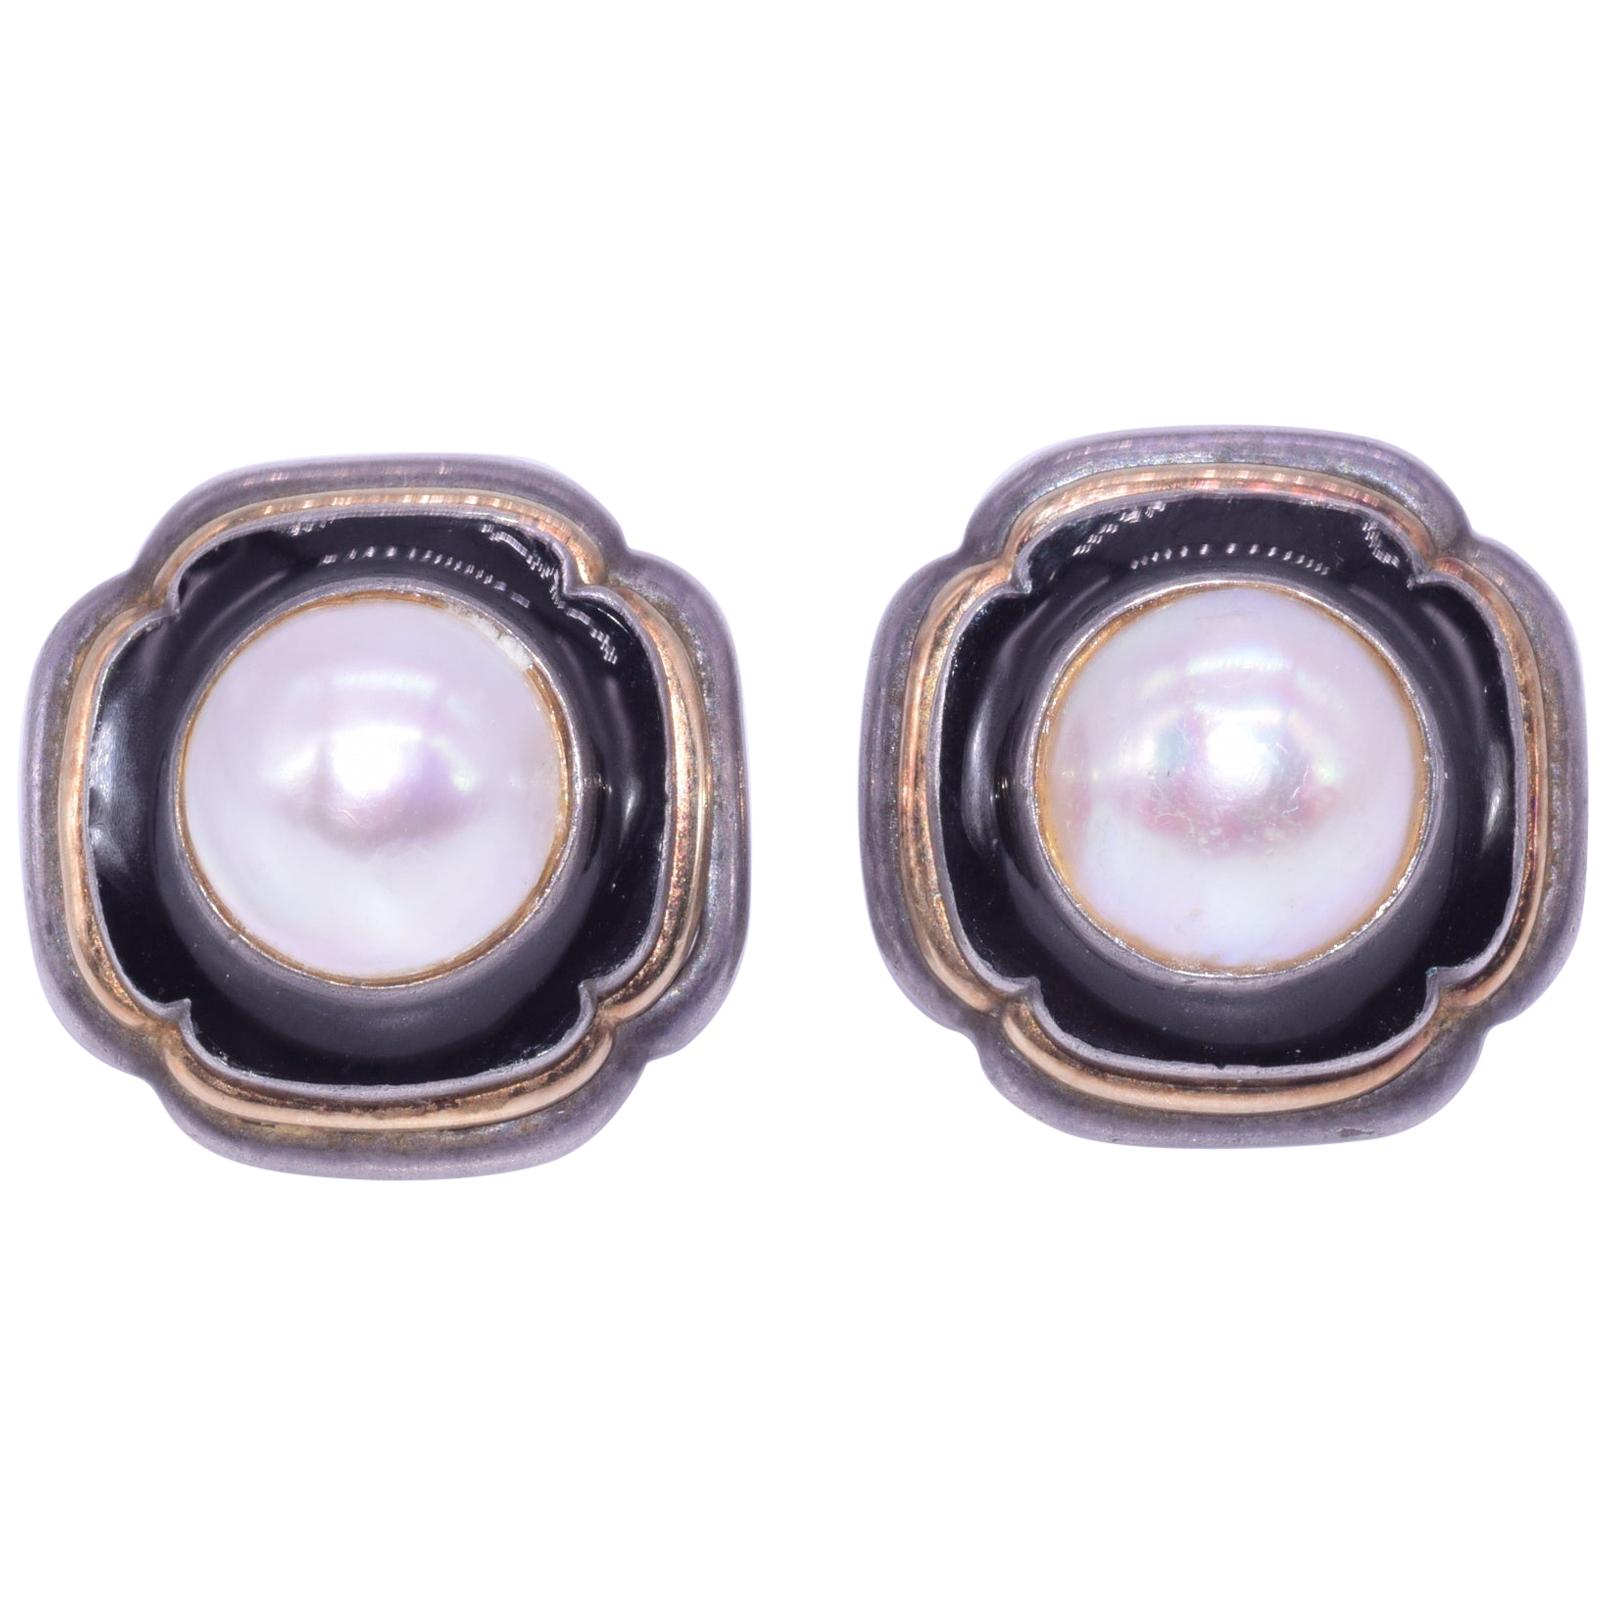 Cartier Silver, Black Enamel and Mabe Pearl Earrings, circa 1940s